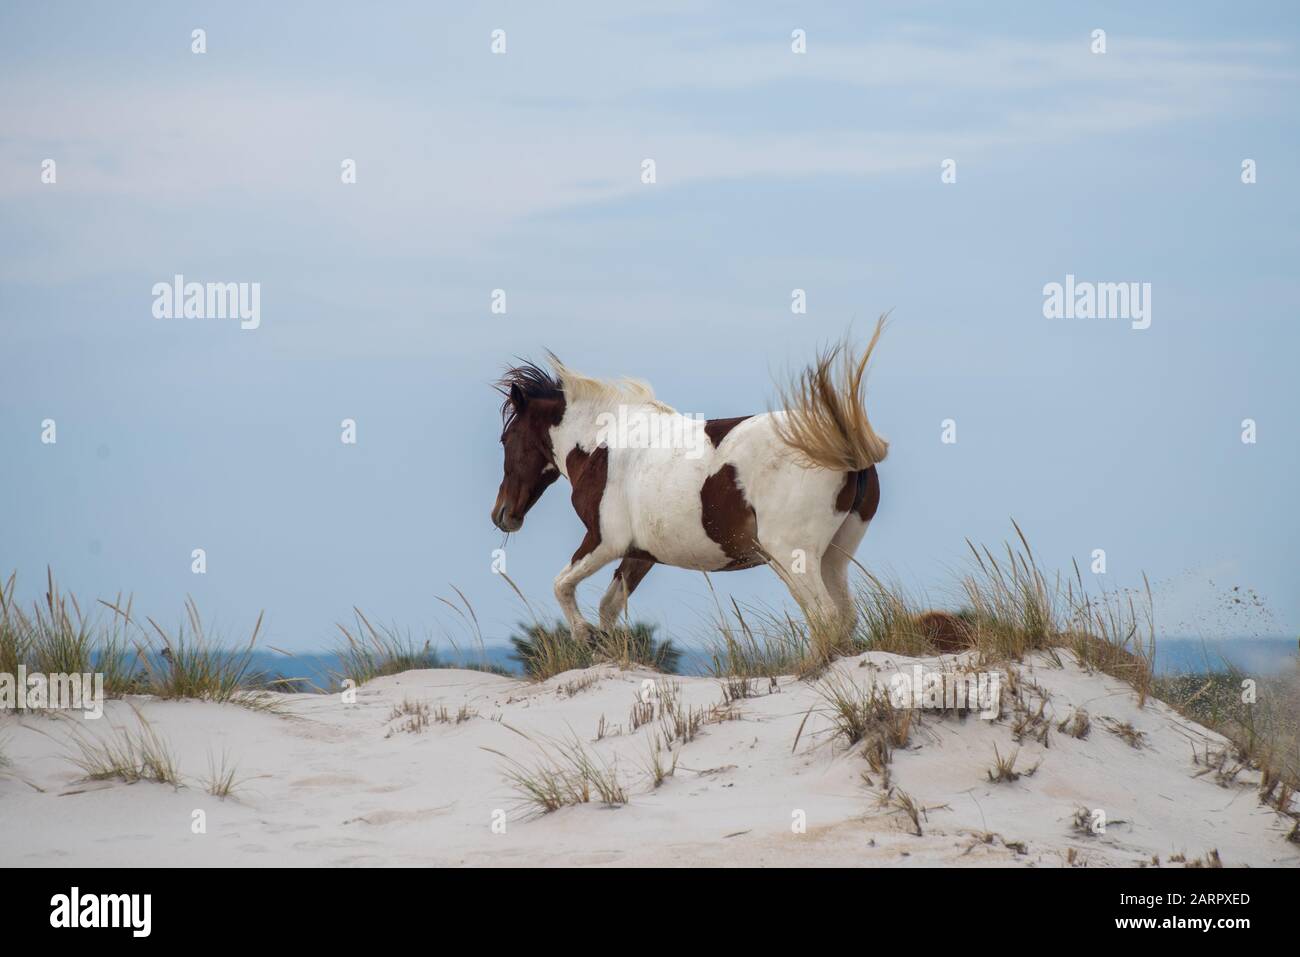 A wild horse kicks up sand at Assateague National Seashore, located on the eastern shore of Maryland, USA. Stock Photo